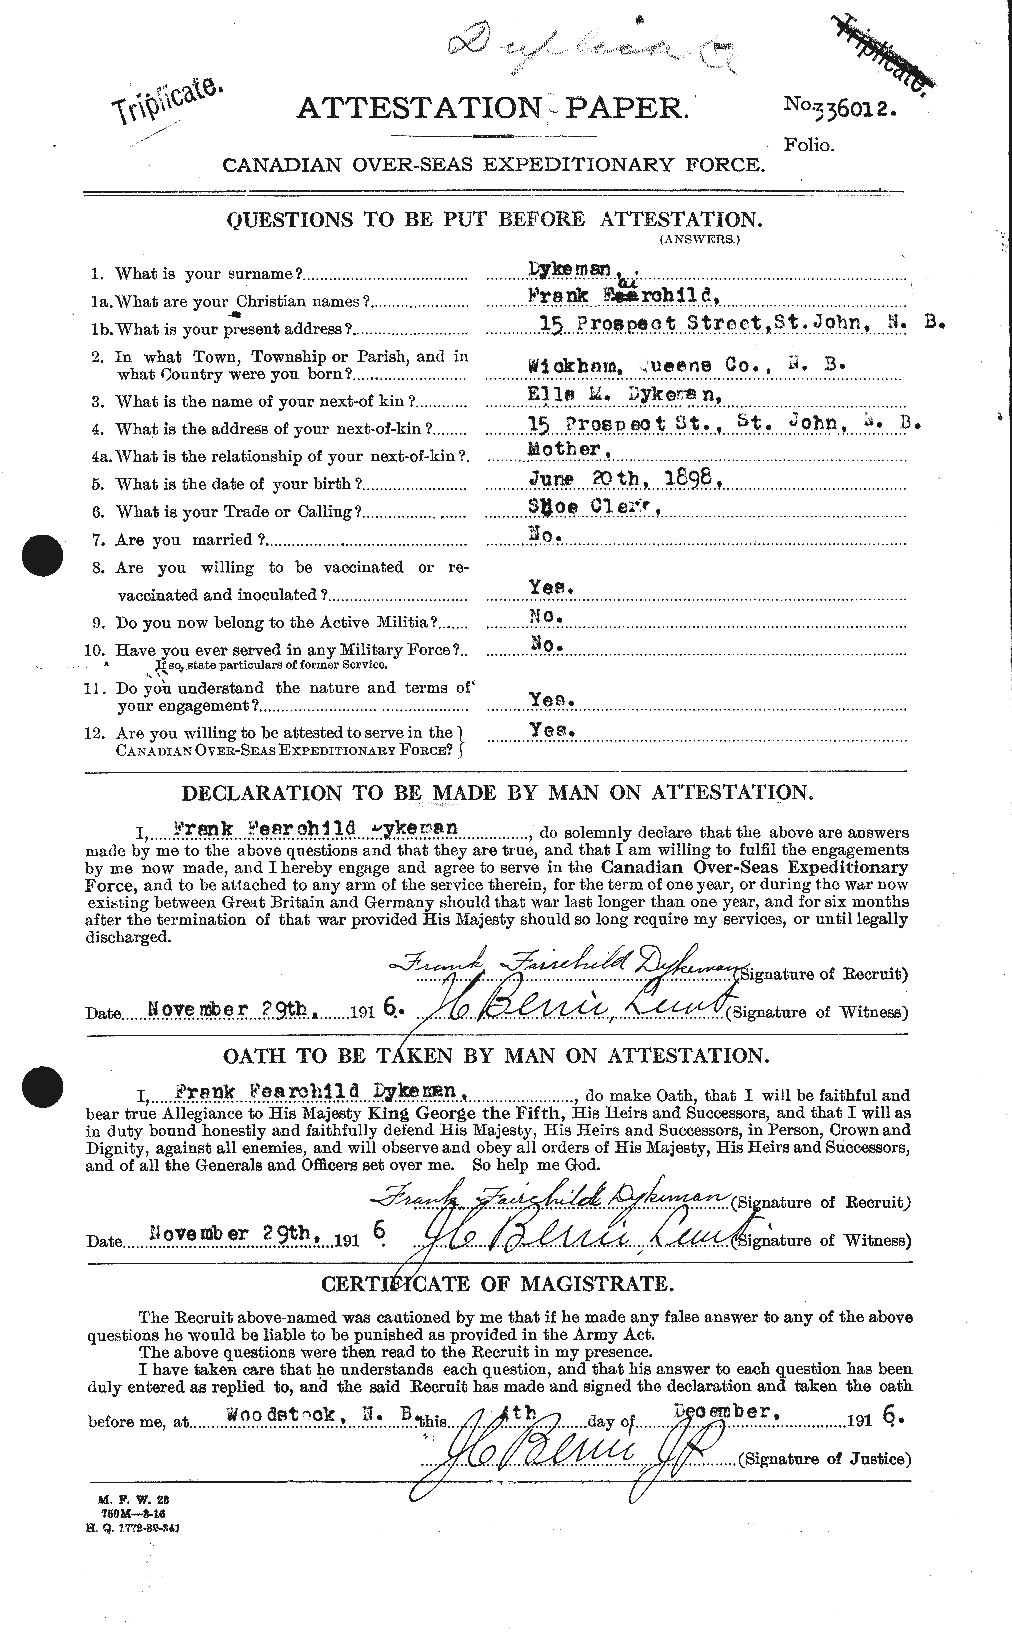 Personnel Records of the First World War - CEF 307251a